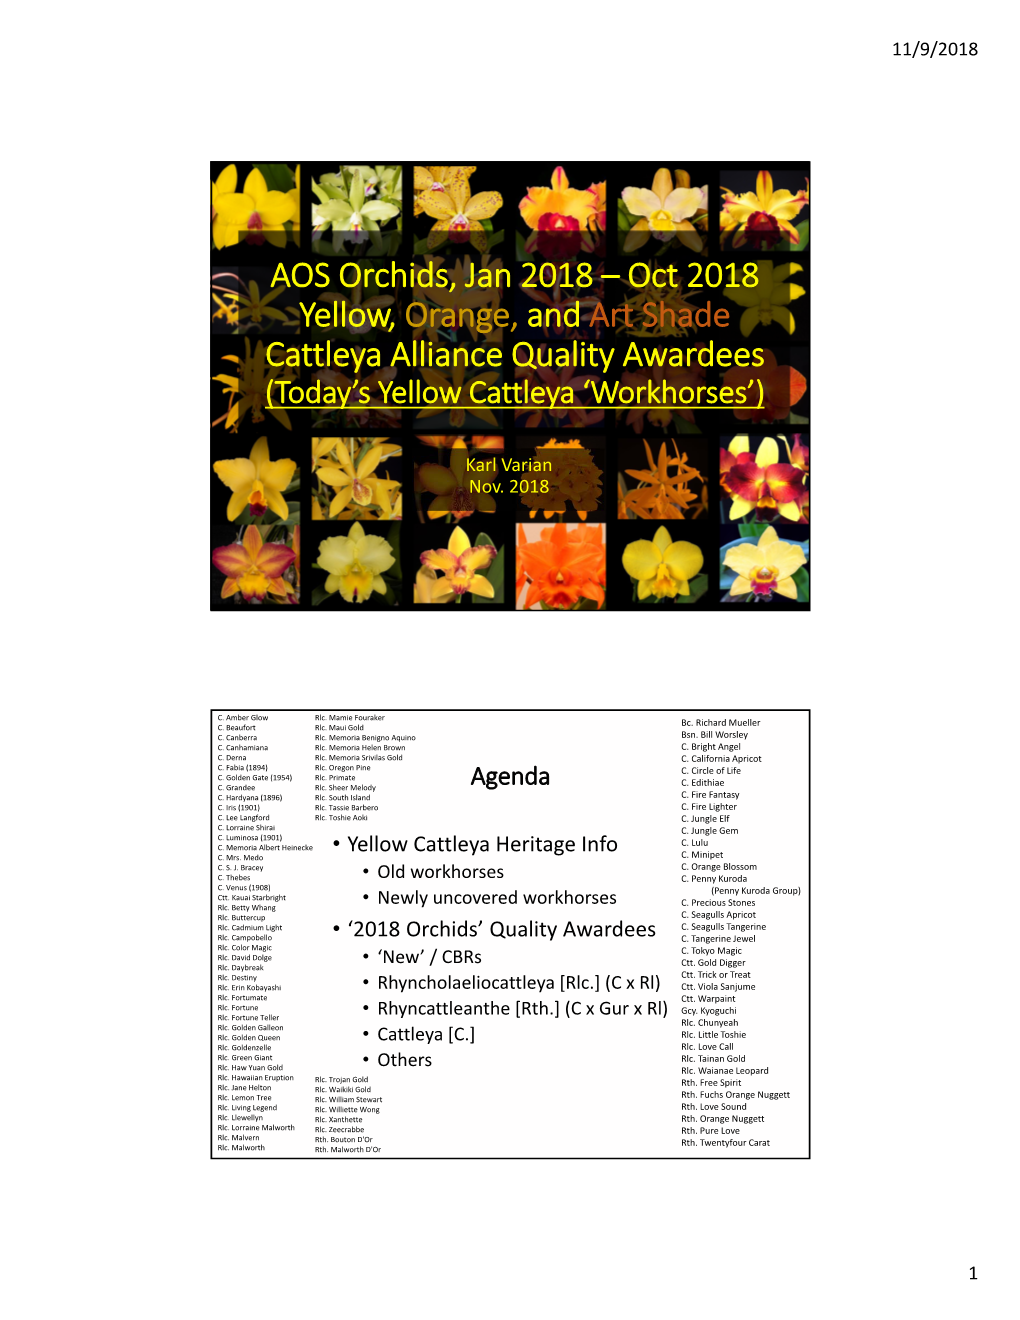 AOS Orchids, Jan 2018 – Oct 2018 Yellow, Orange, and Art Shade Cattleya Alliance Quality Awardees (Today’S Yellow Cattleya ‘Workhorses’)